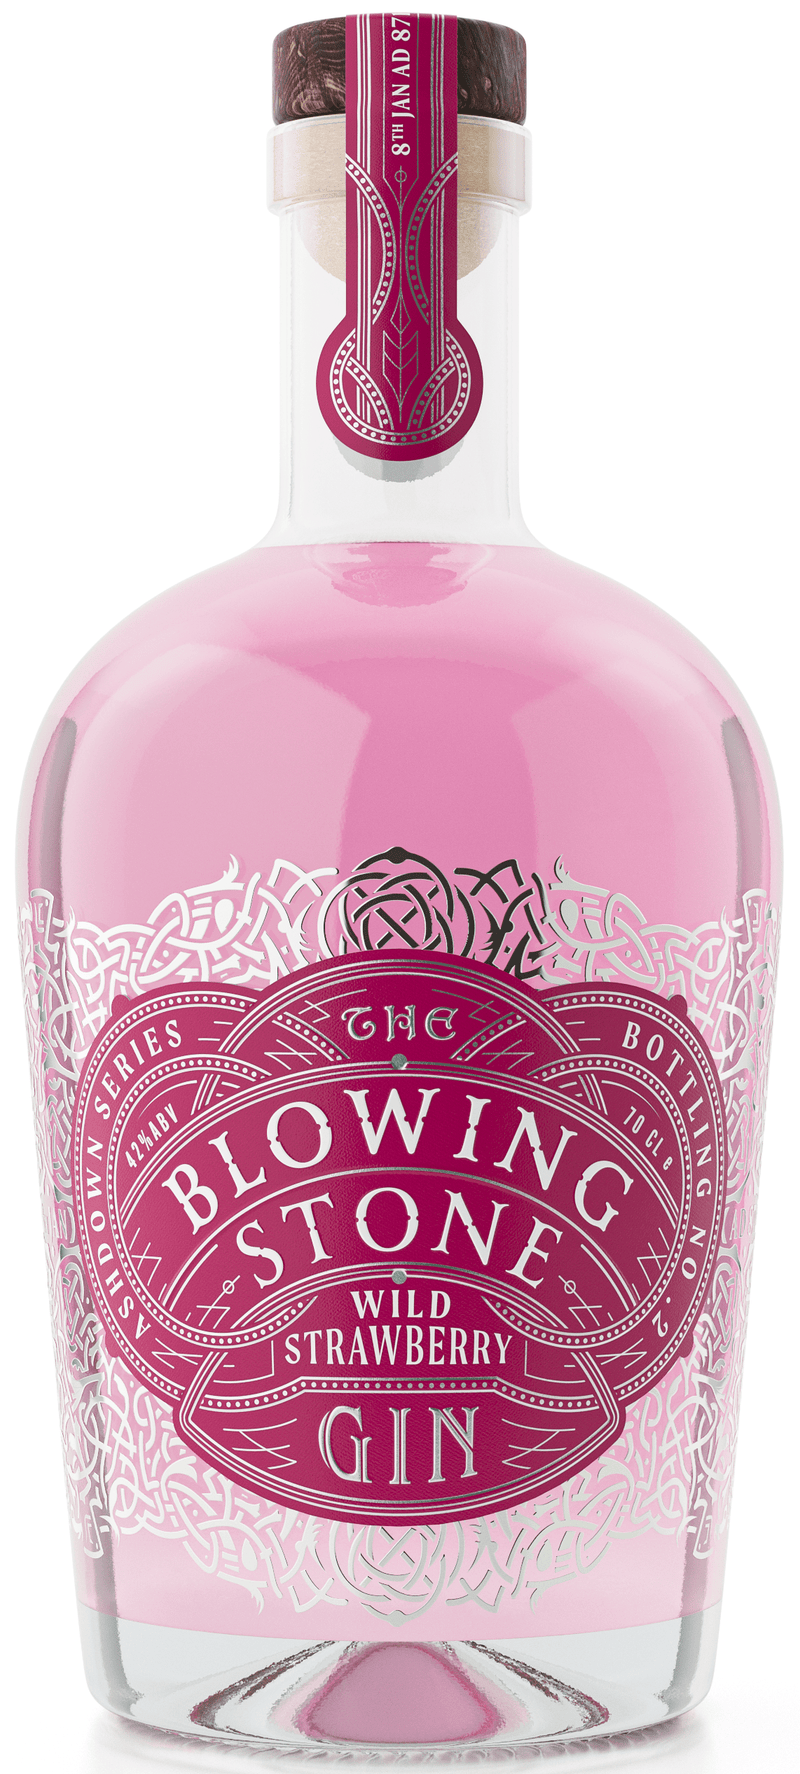 The Blowing Stone Wild Strawberry Gin 70cl